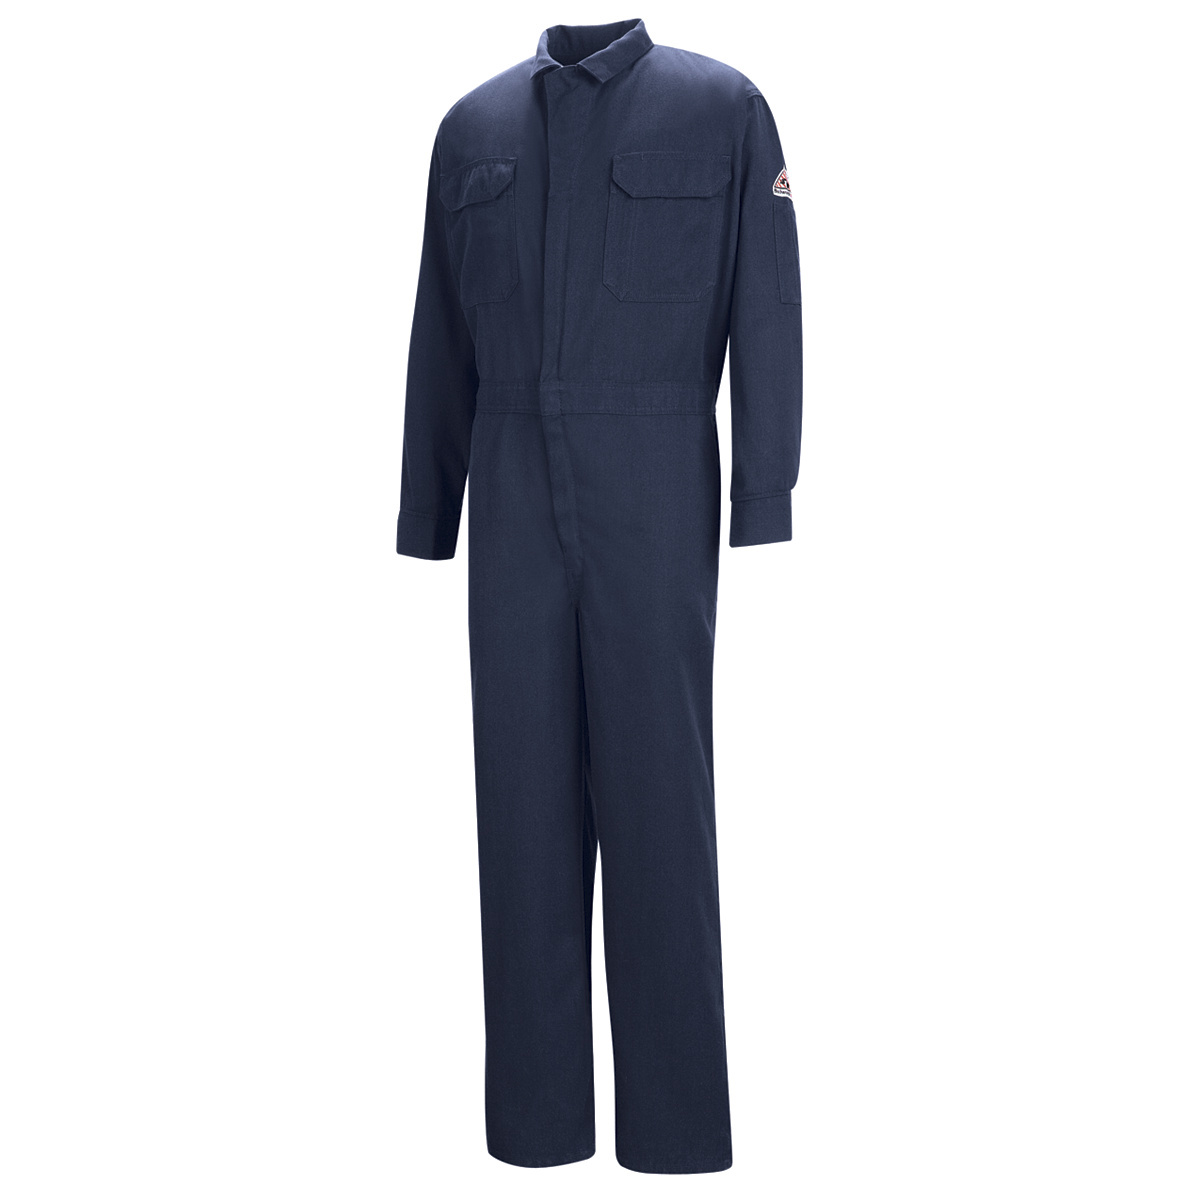 Bulwark® 52 Tall Navy Blue Modacrylic/Lyocell/Aramid Flame Resistant Coveralls With Zipper Front Closure